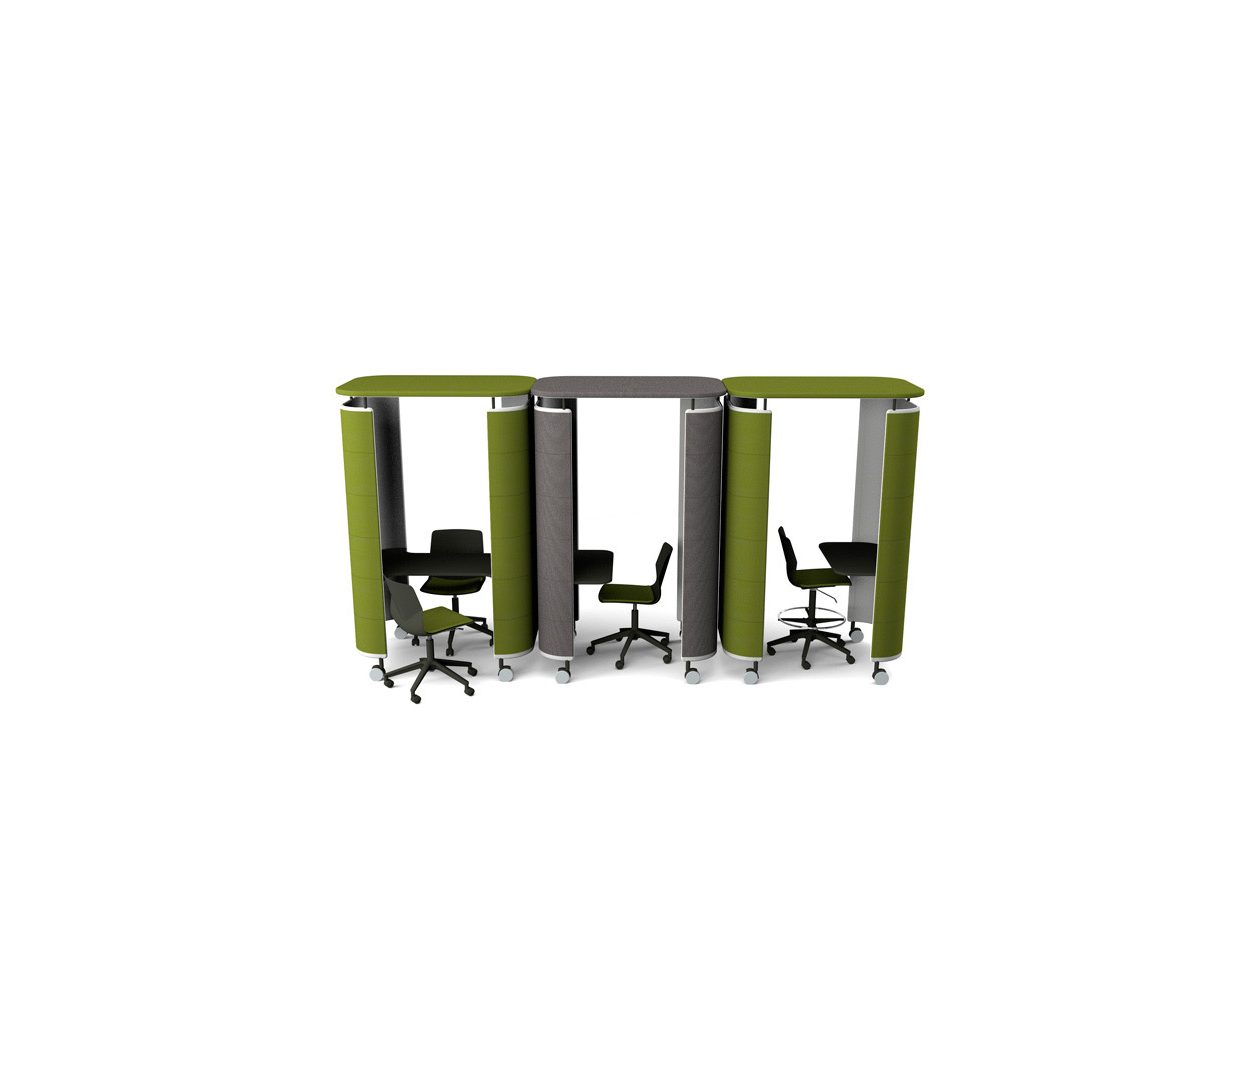 OCEE_FOUR – Work _ Study Booths – InnoPod – Packshot Image 1 Large